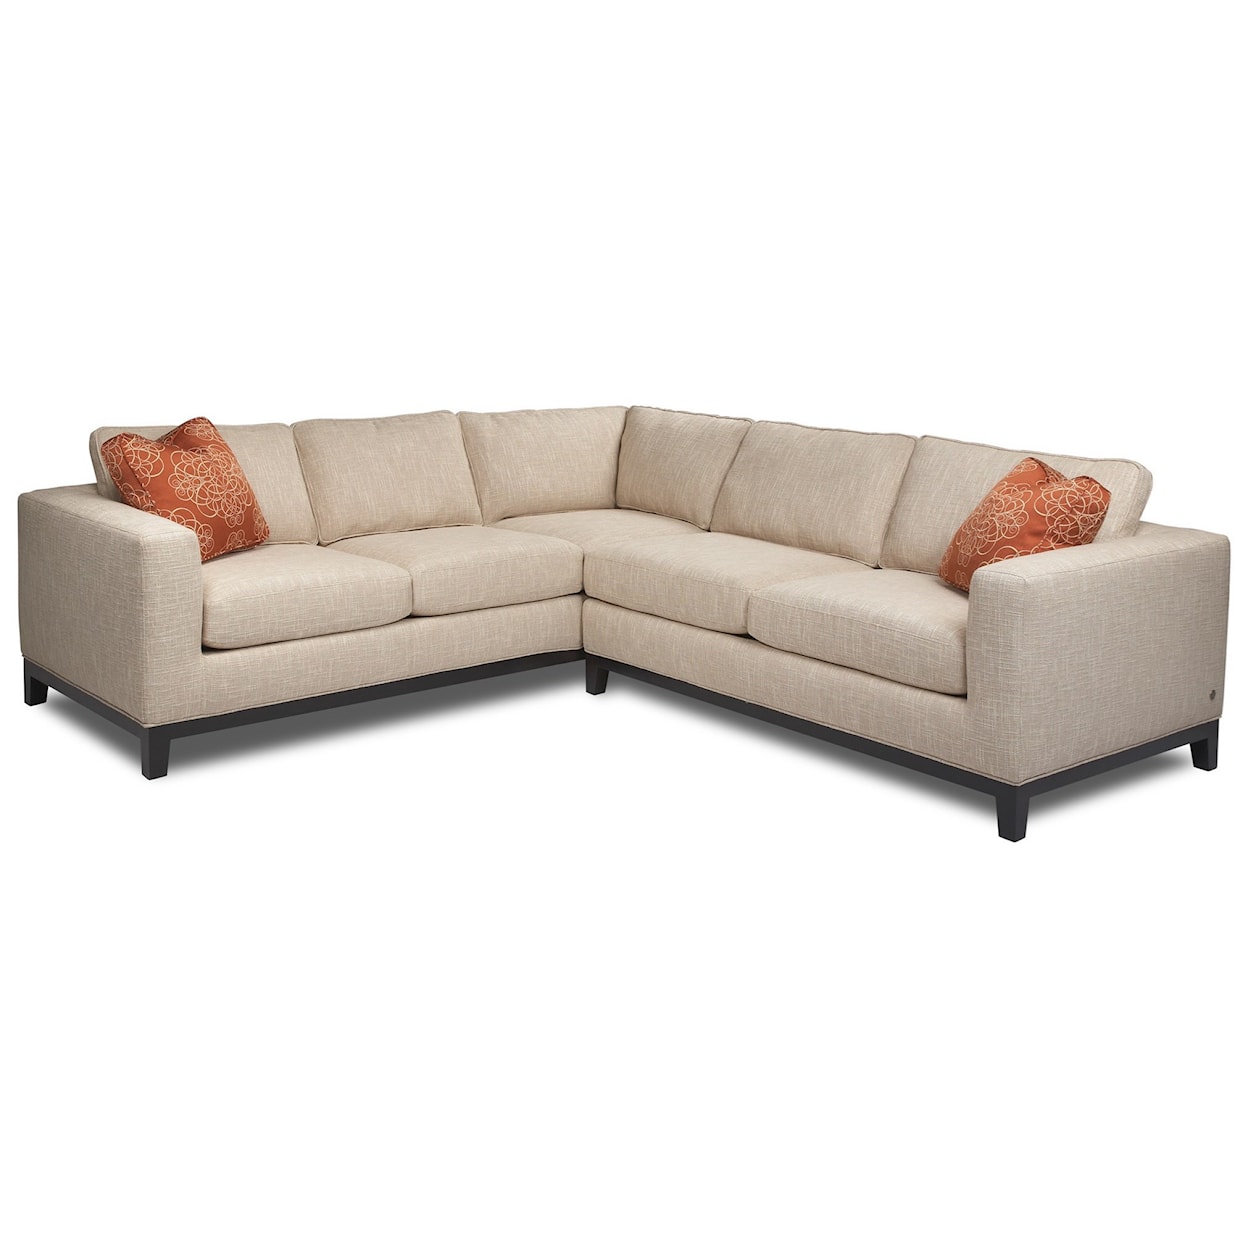 American Leather Brooke Sectional